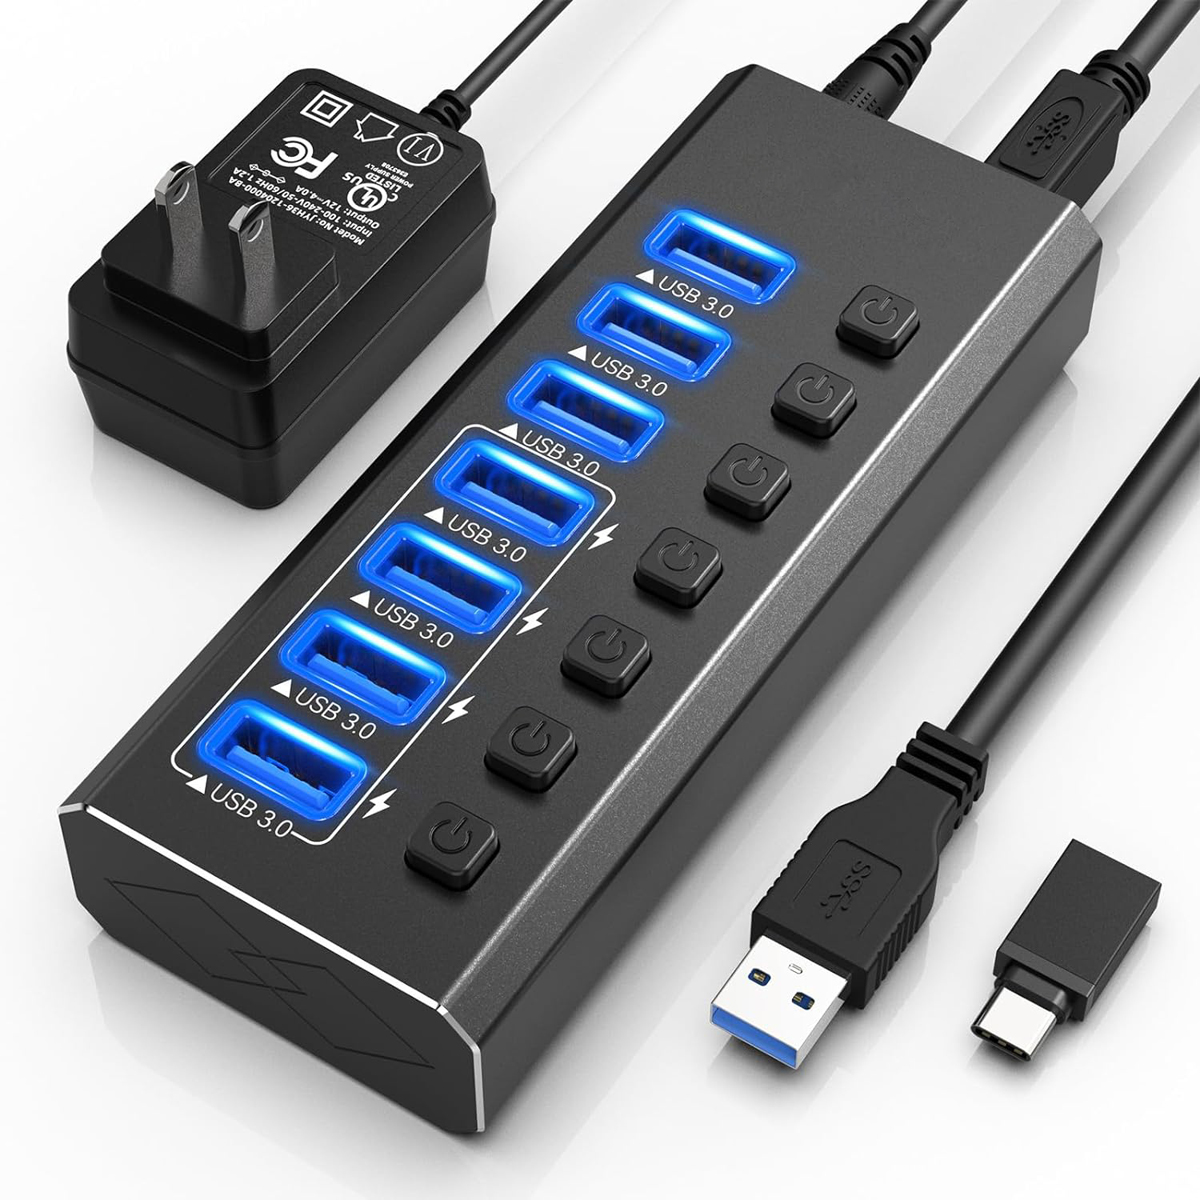 USB Hub 3.0 Powered, 7 Ports USB Data Hub Splitter with 4 Smart Charging  Port and 12V Powered Adapter and ON/Off Switches for MacBook, Mac Pro/Mini,  iMac, Surface Pro Laptop/PC 